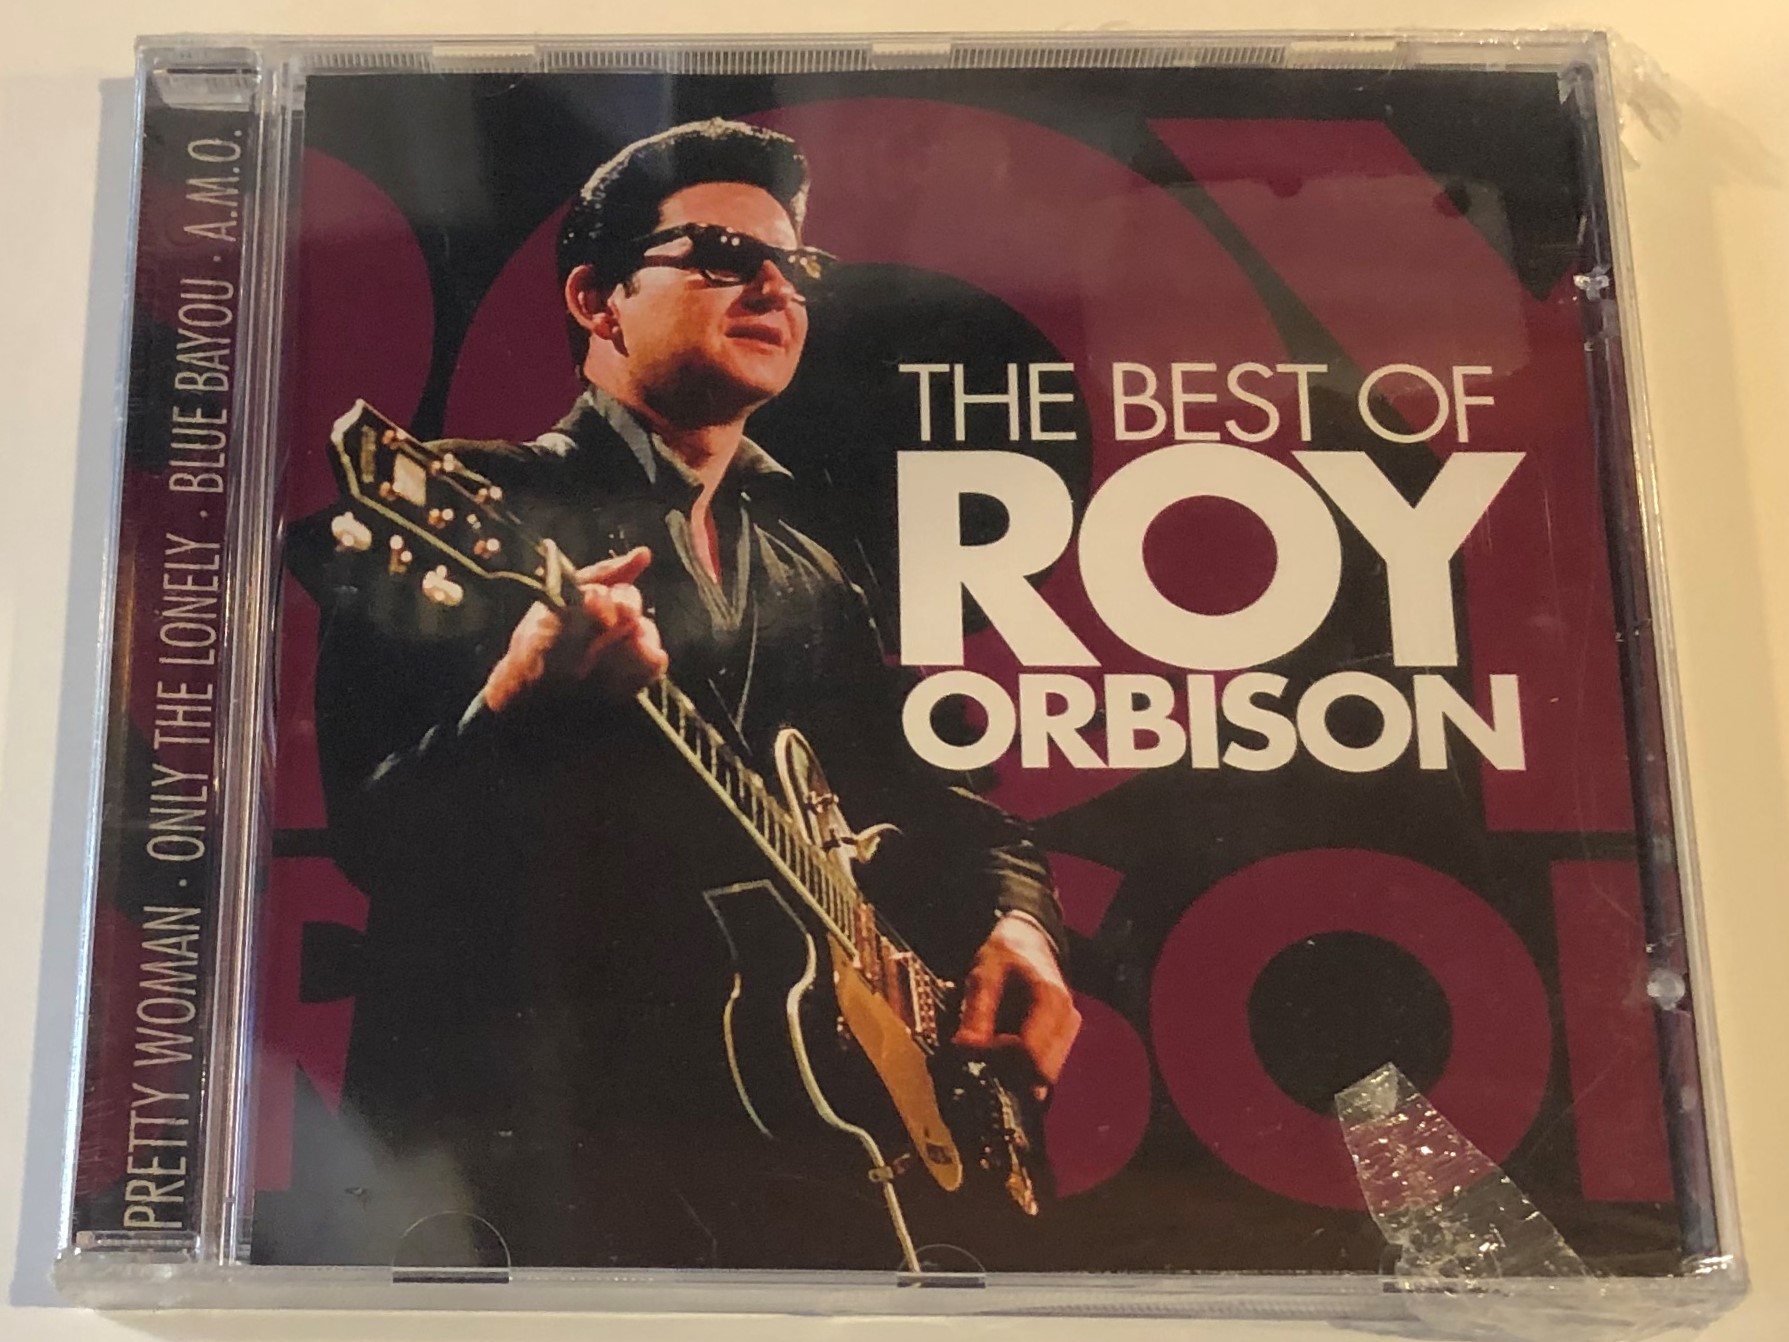 the-best-of-roy-orbison-pretty-woman-only-the-lonely-blue-bayou-a.m.o.-eurotrend-audio-cd-cd-152-1-.jpg